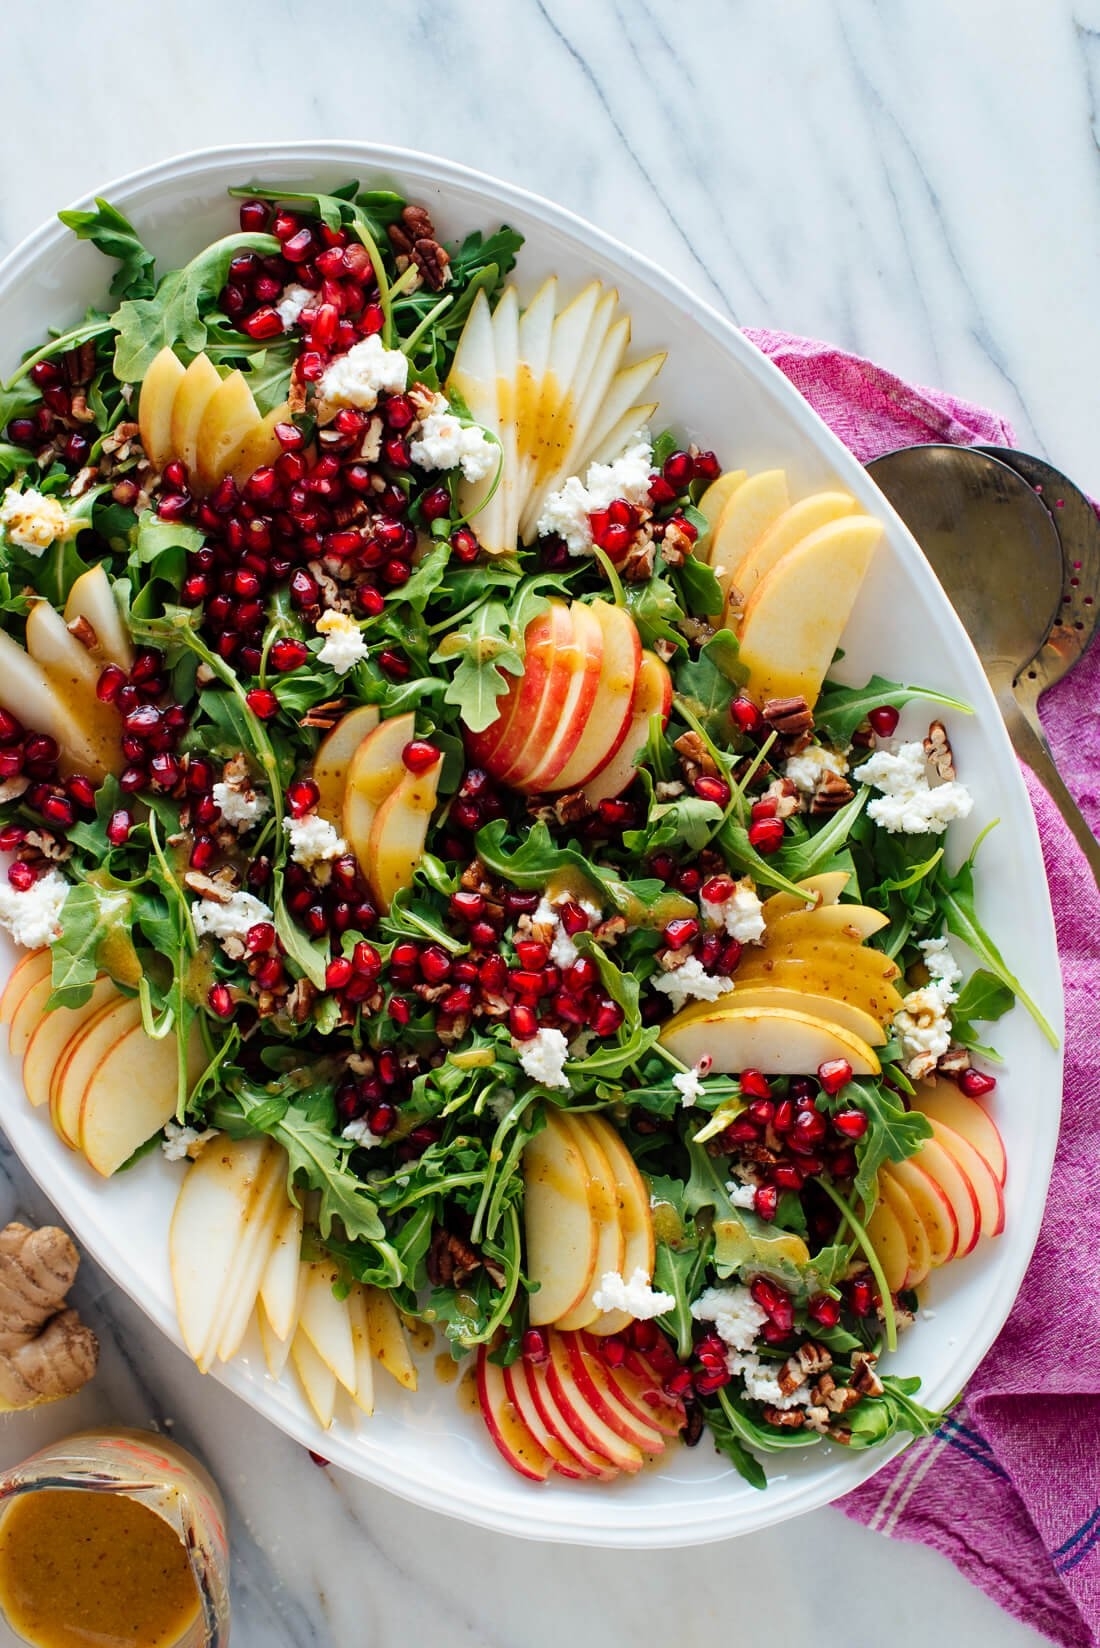 Sliced pears, pomegranate seeds, pecans, and goat cheese atop a bed of arugula